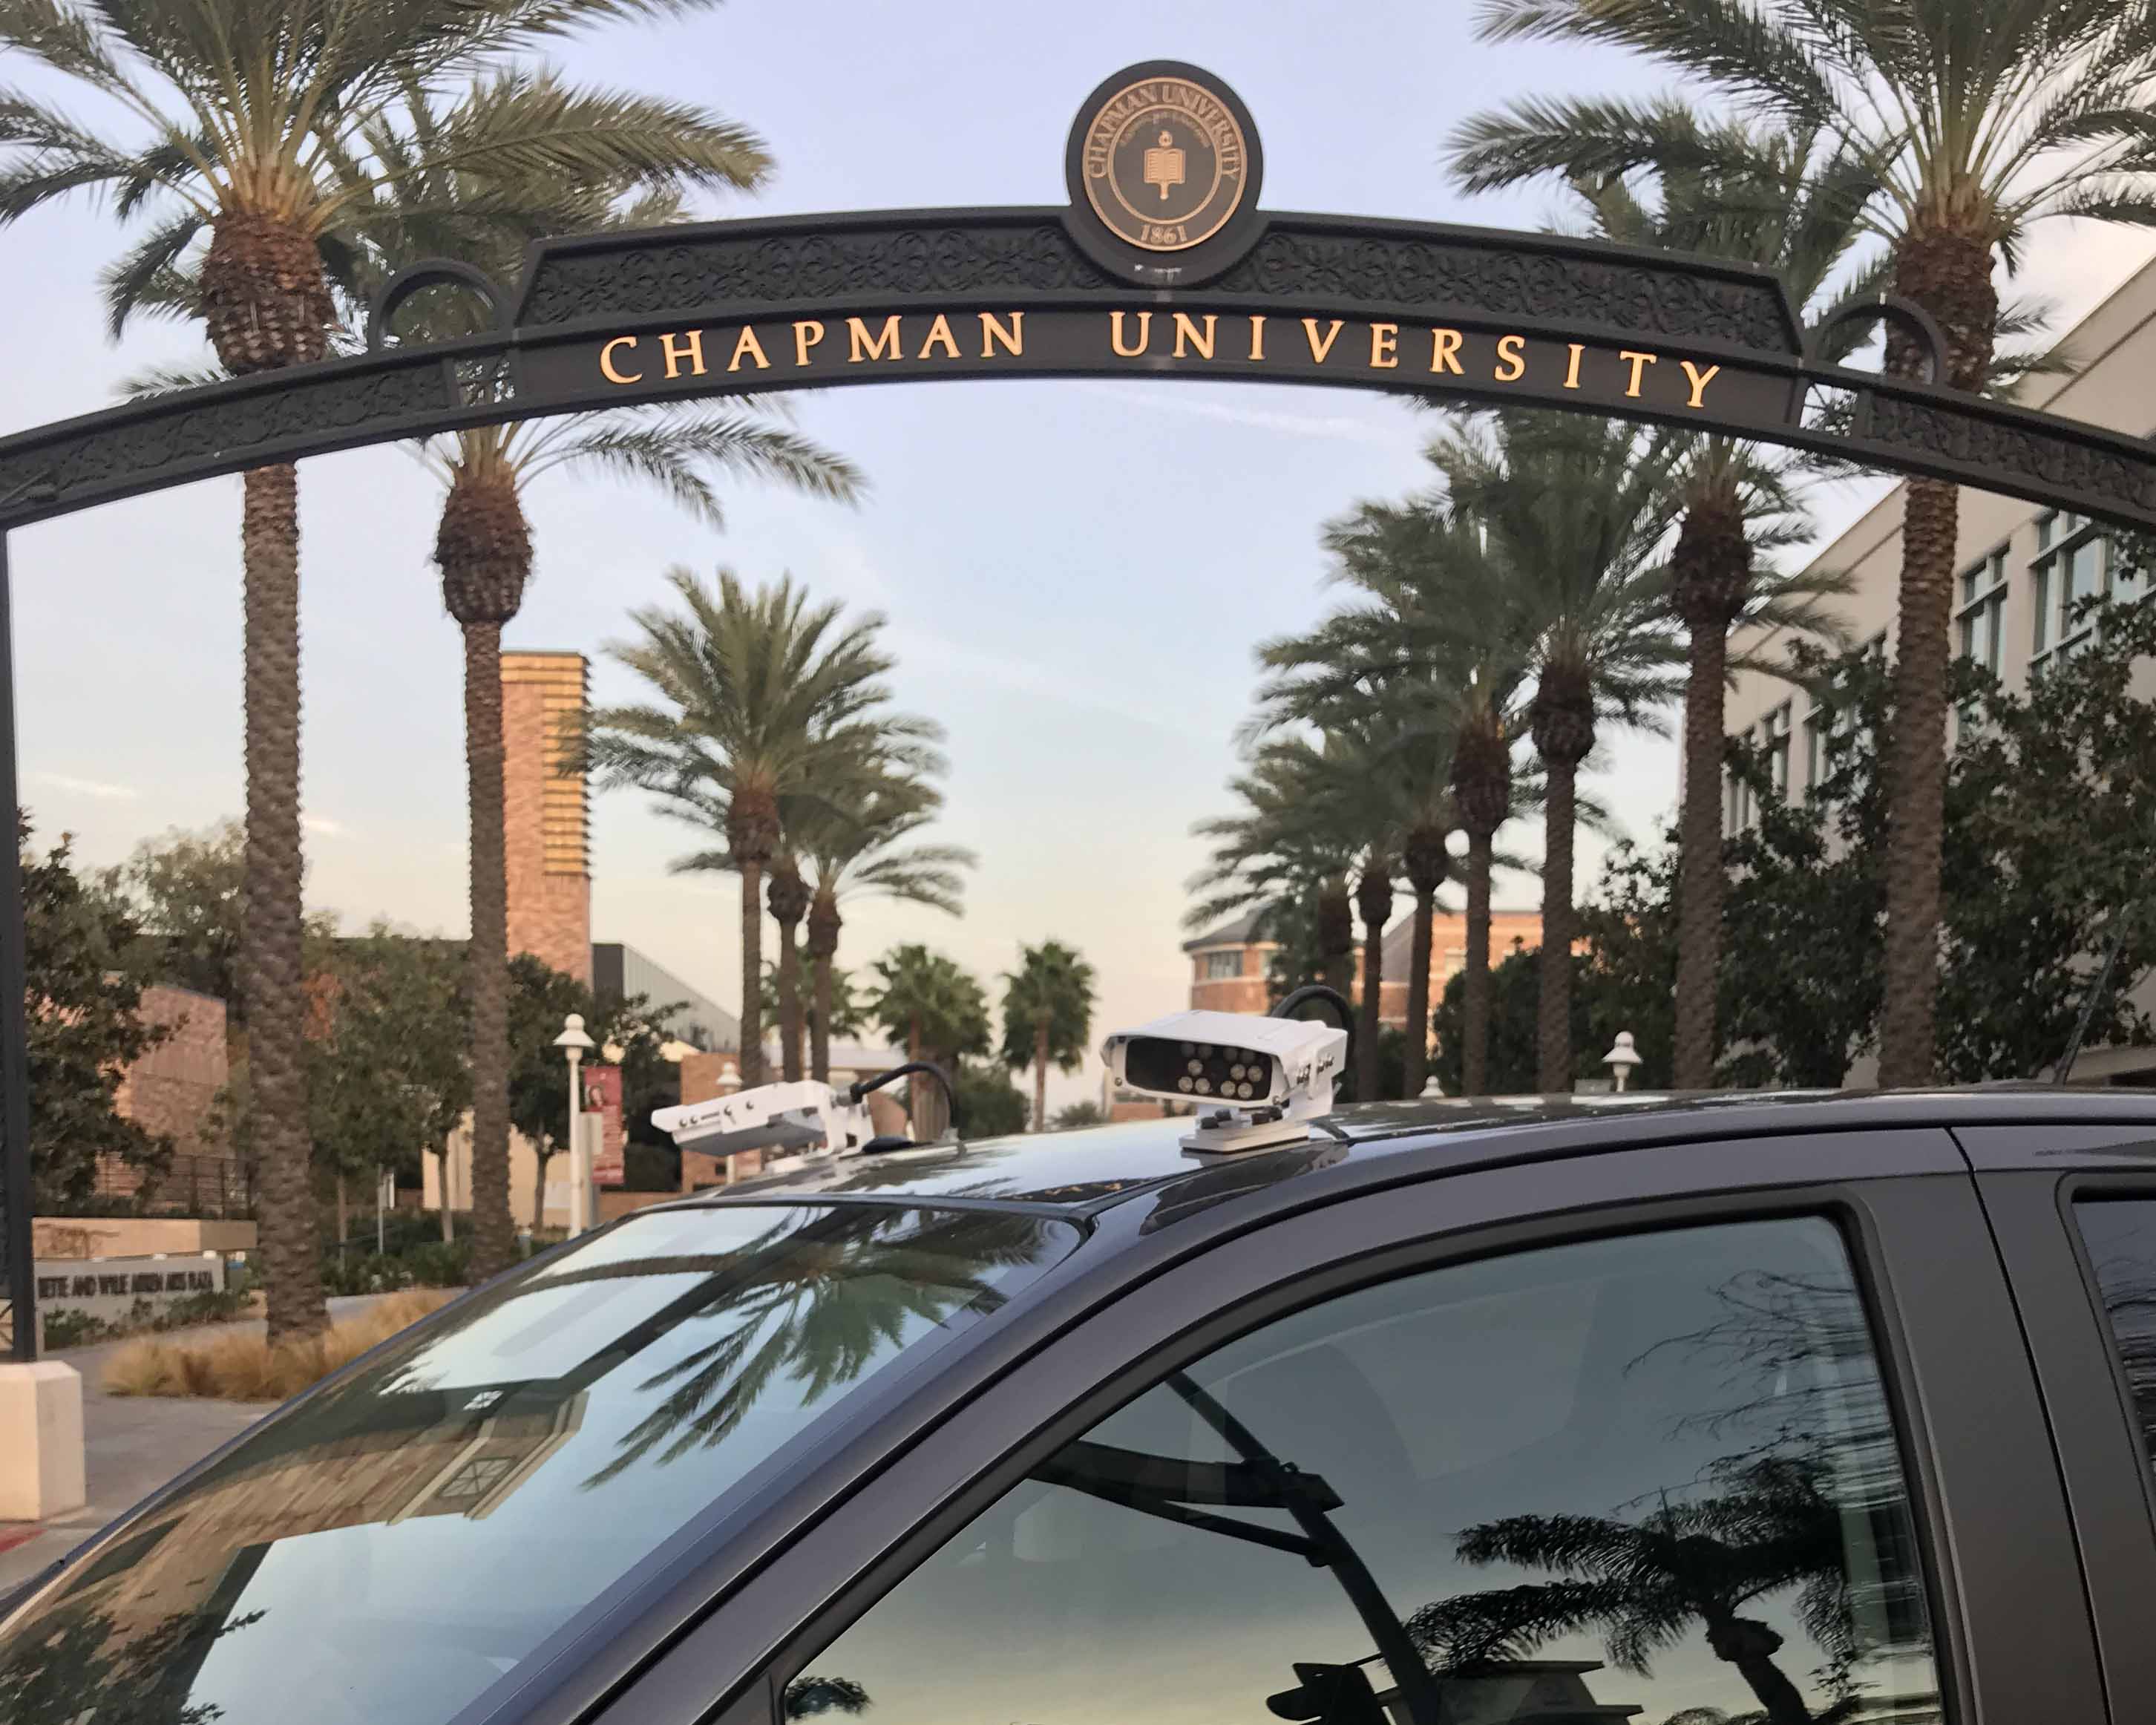 black Enforcement vehicle with two LPR cameras  in front of Chapman University entrance gate